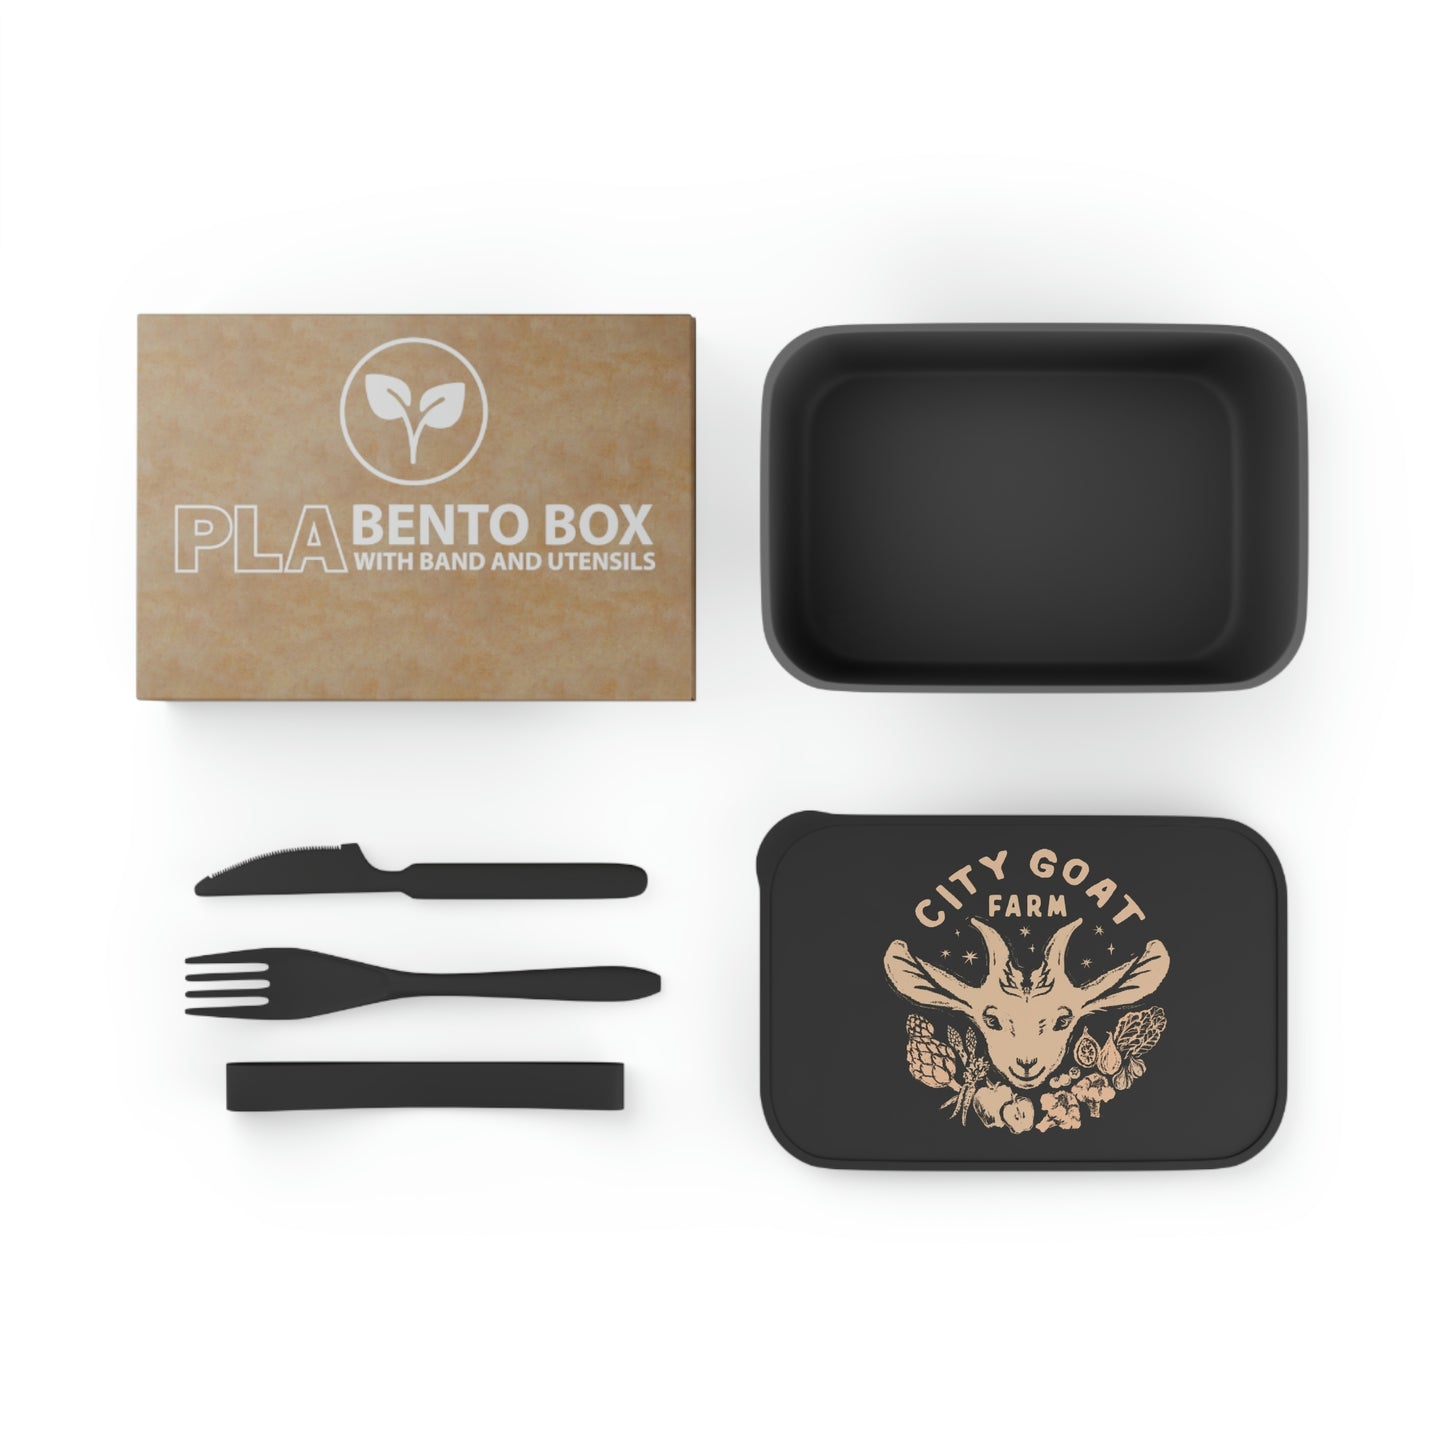 CITY GOAT FARM - HILDY - PLA Bento Box with Band and Utensils